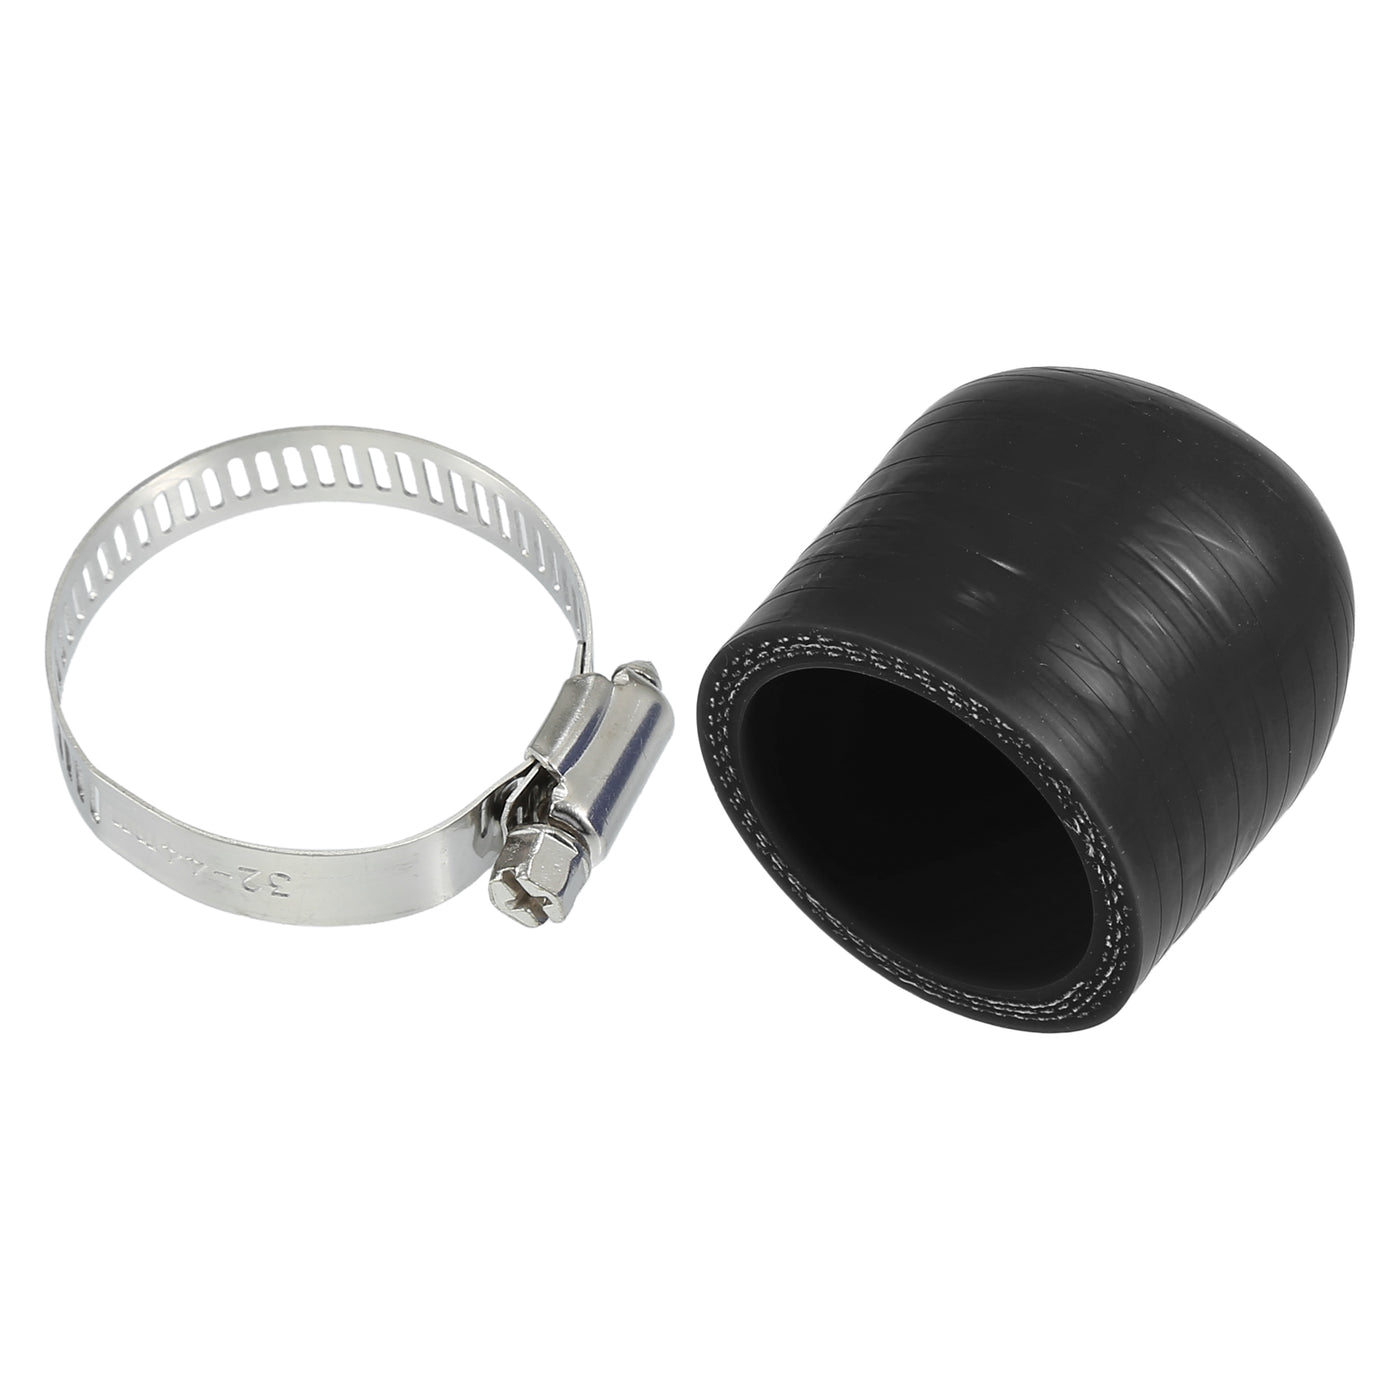 X AUTOHAUX 1 Set 30mm Length 35mm/1.38" ID Black Car Silicone Rubber Hose End Cap with Clamps Silicone Reinforced Blanking Cap for Bypass Tube Universal